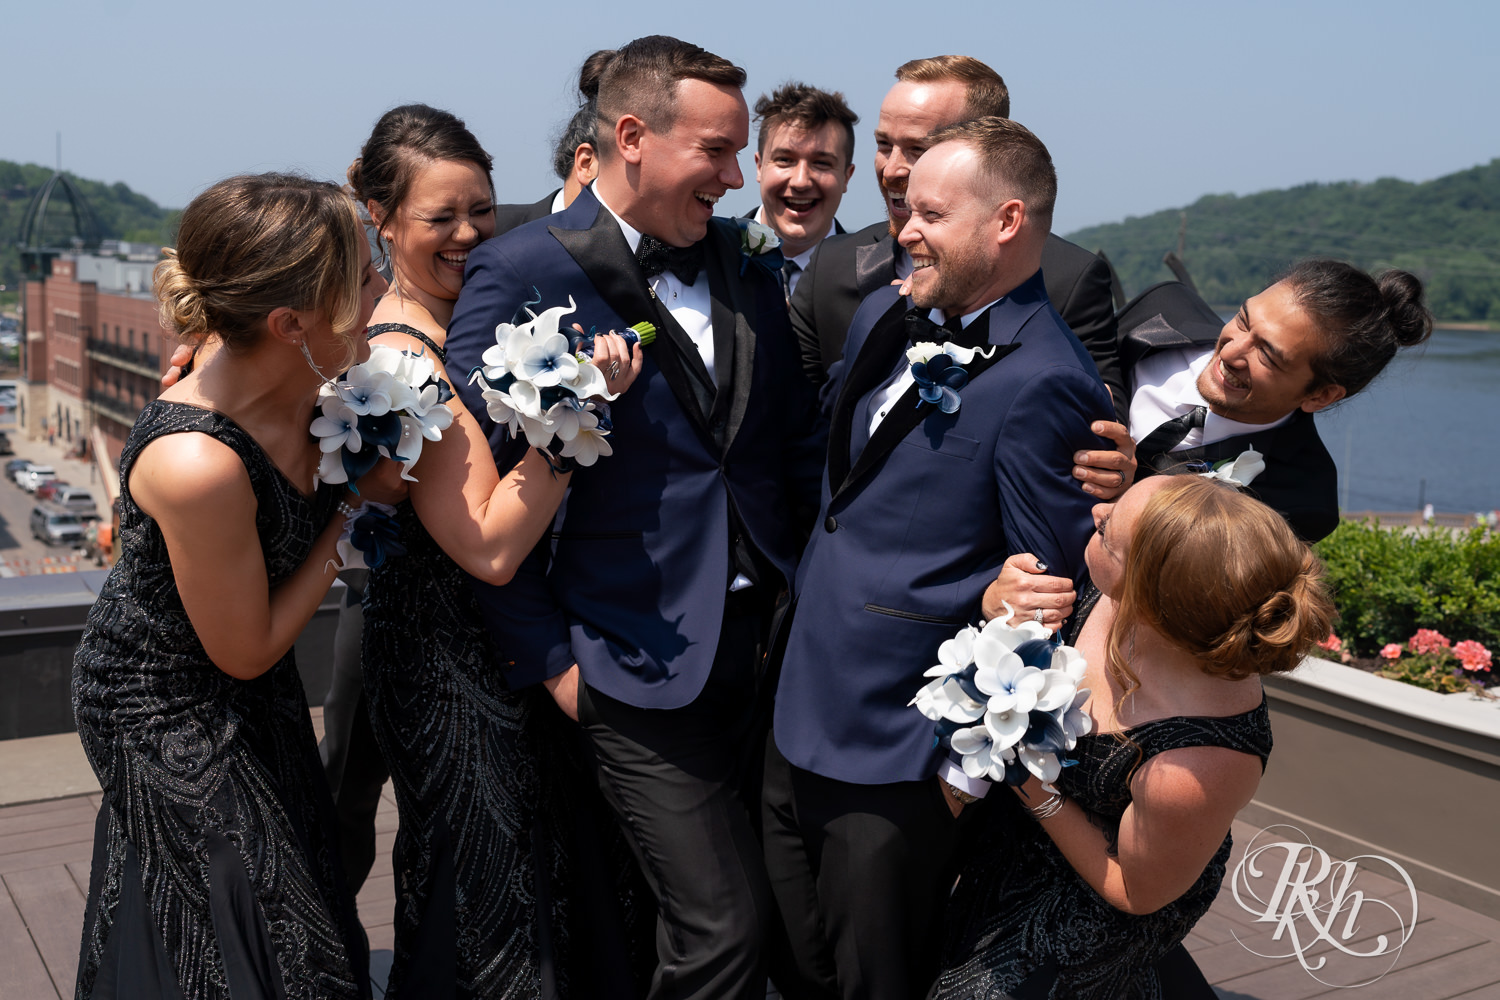 Grooms in blue tuxedos laugh on rooftop with wedding party before gay wedding in Stillwater, Minnesota.